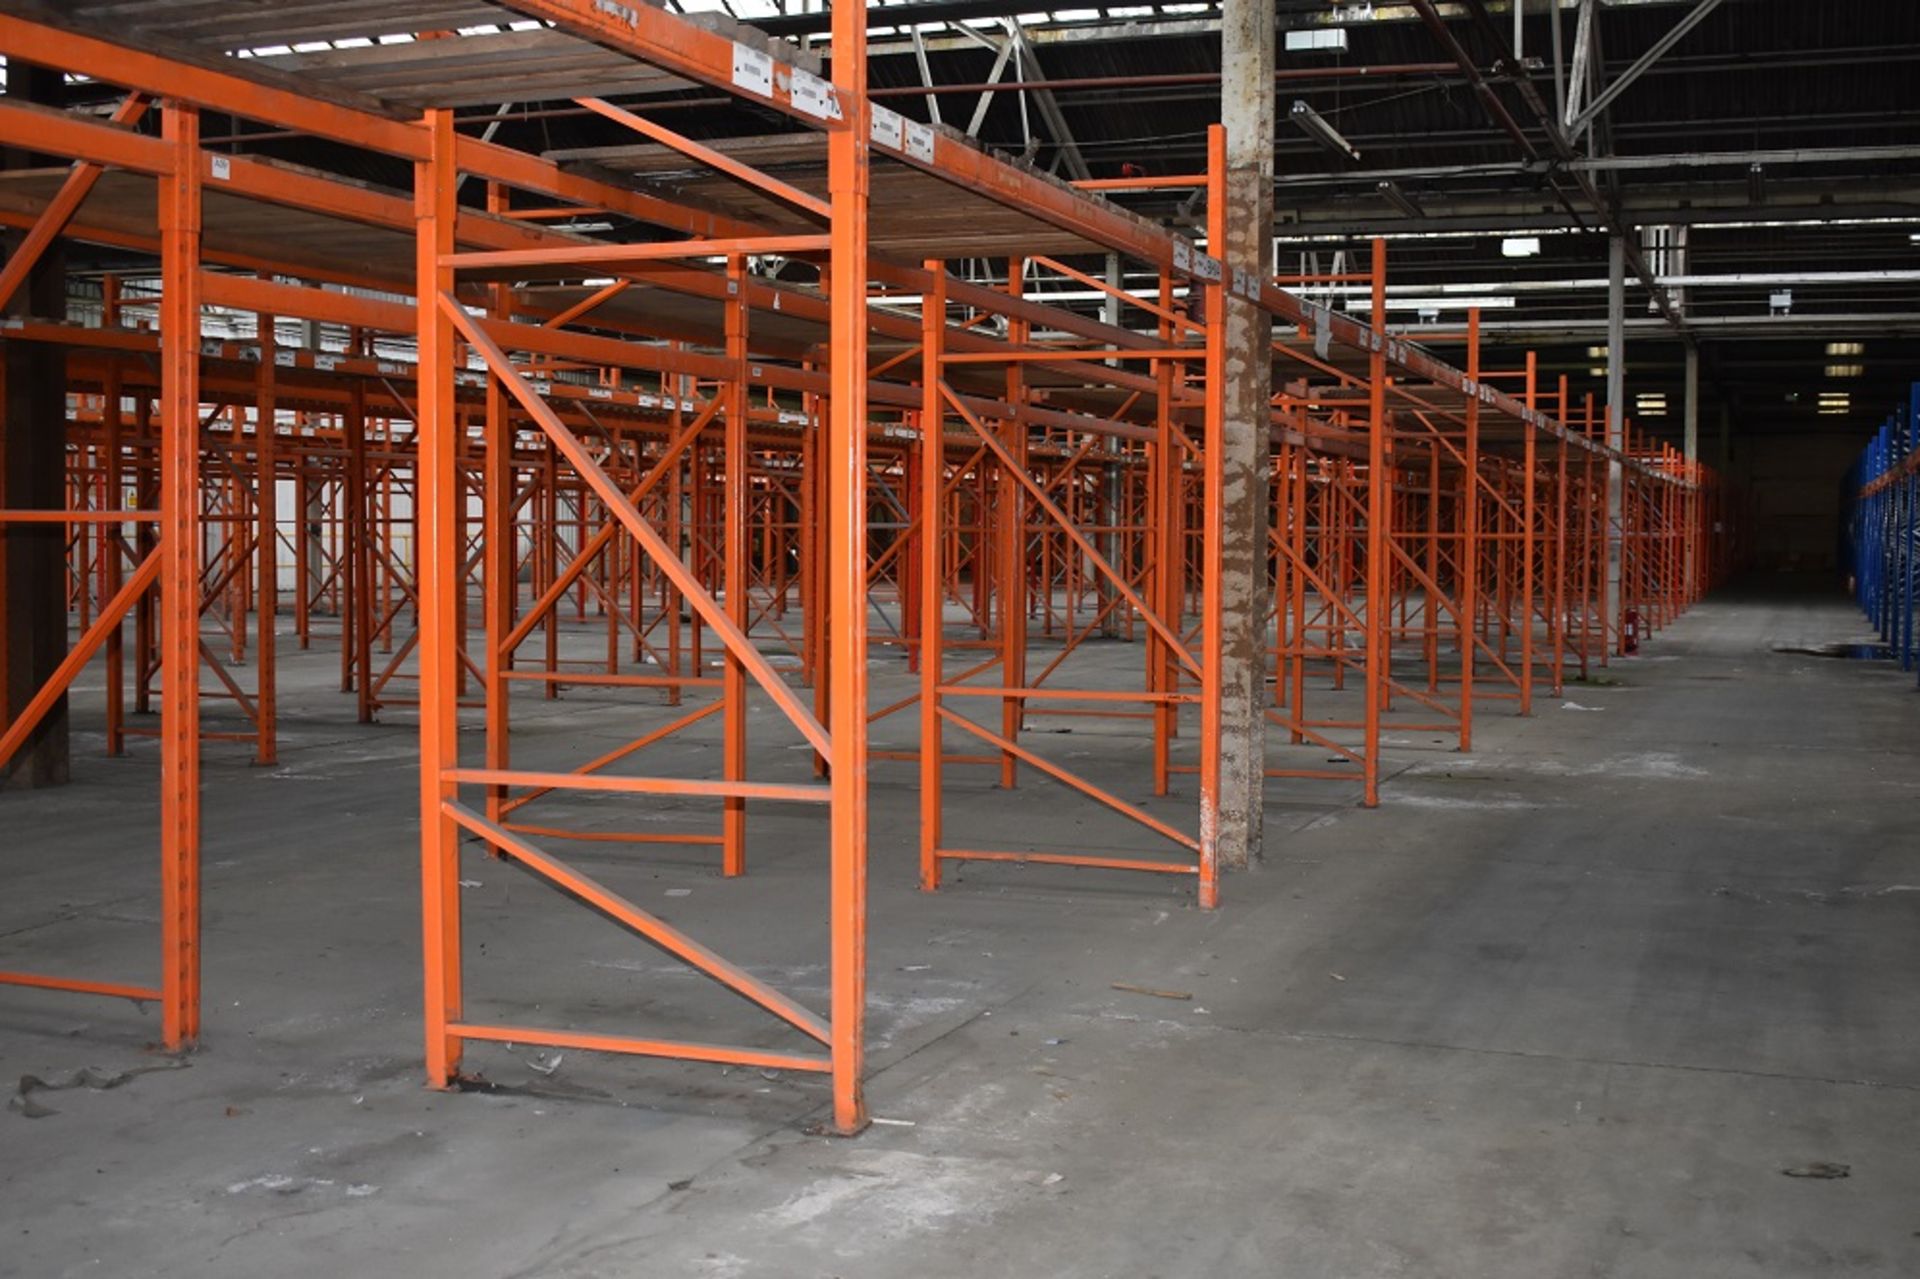 21 X BAYS OF 3 MTR HIGH BOLTLESS PALLET RACKING CONSISTING OF 43 BEAMS 23 X FRAMES - Image 3 of 3